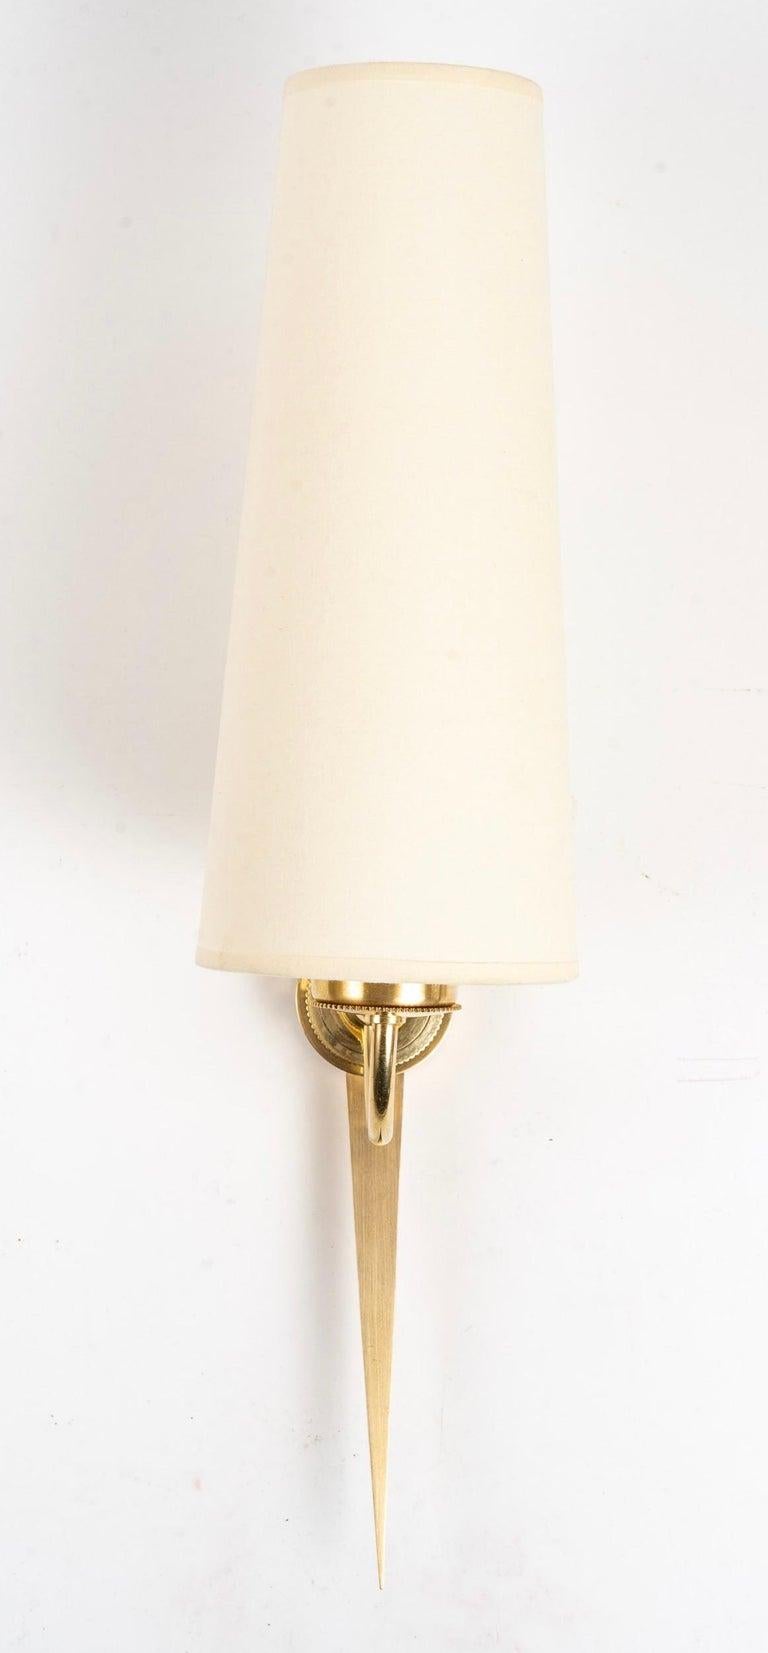 Elegant pair of wall lights from Maison Arlus in gilded bronze and brass.
Composed of a central arm in matt gilded bronze representing a stylized arrow.
A curved arm in gilded brass placed at the front of the wall lamp rests on the central rod on